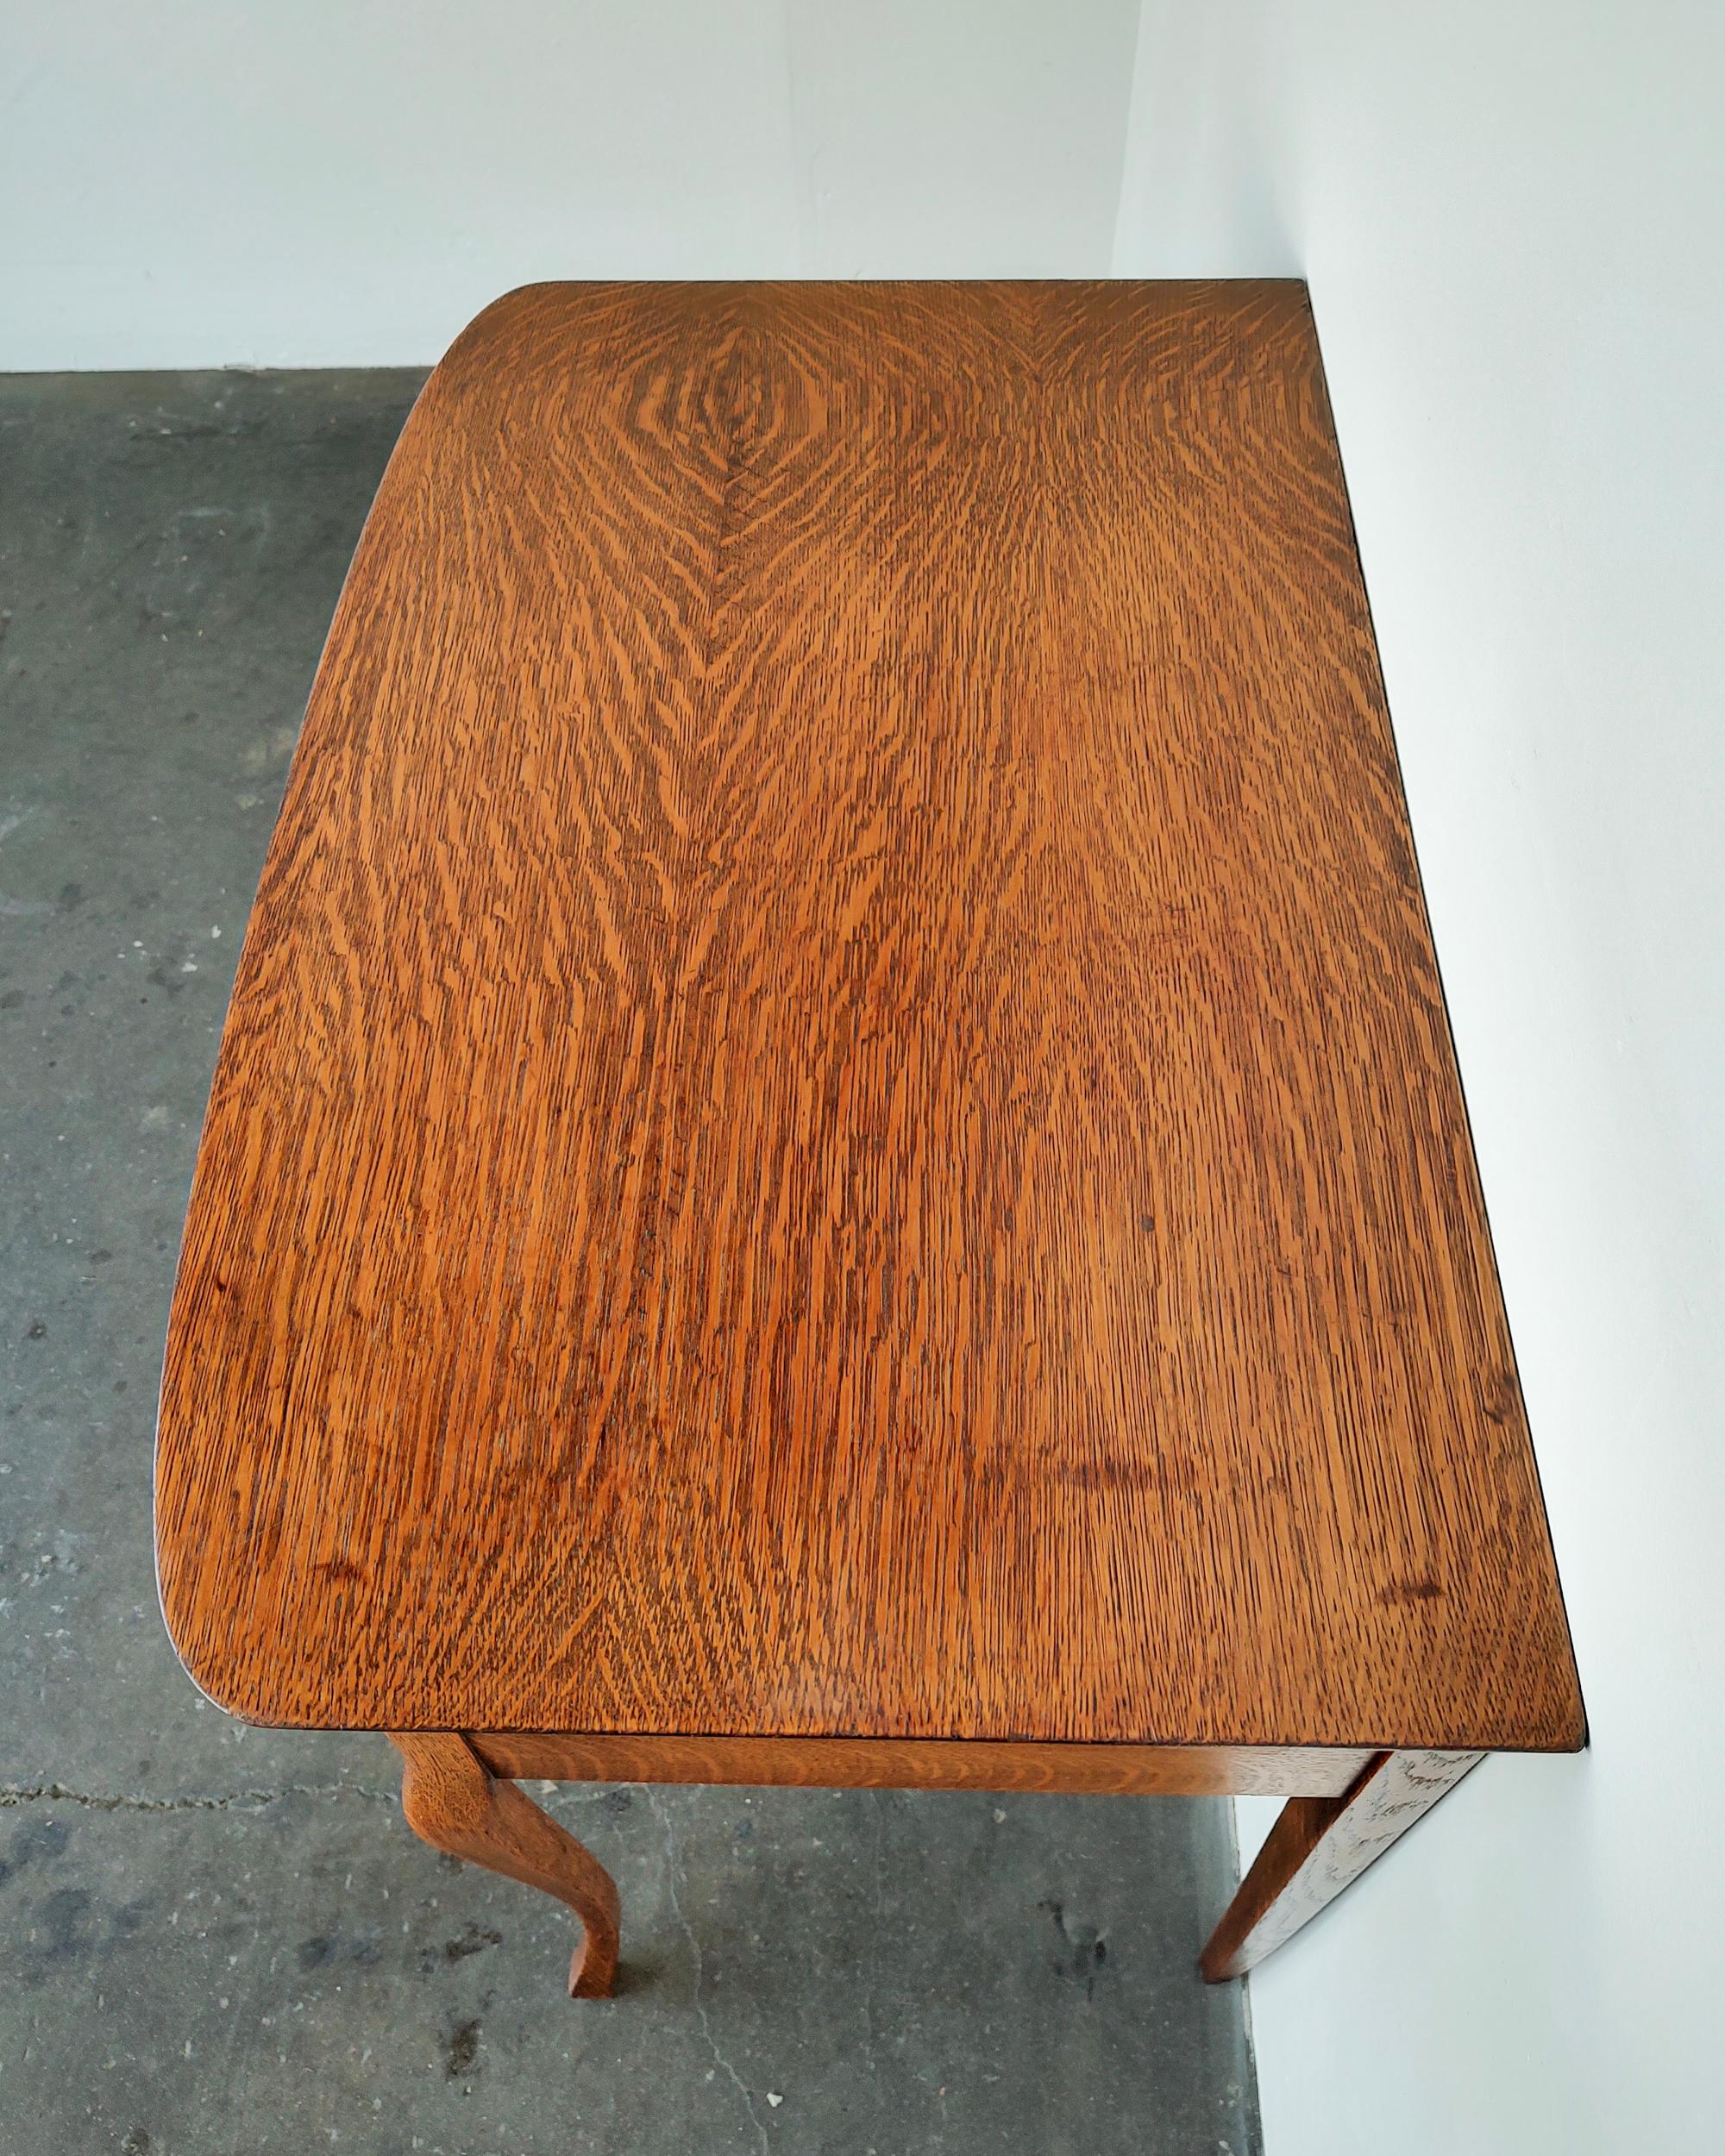 Antique Early American Oak Table with Drawer Early 20th Century For Sale 4